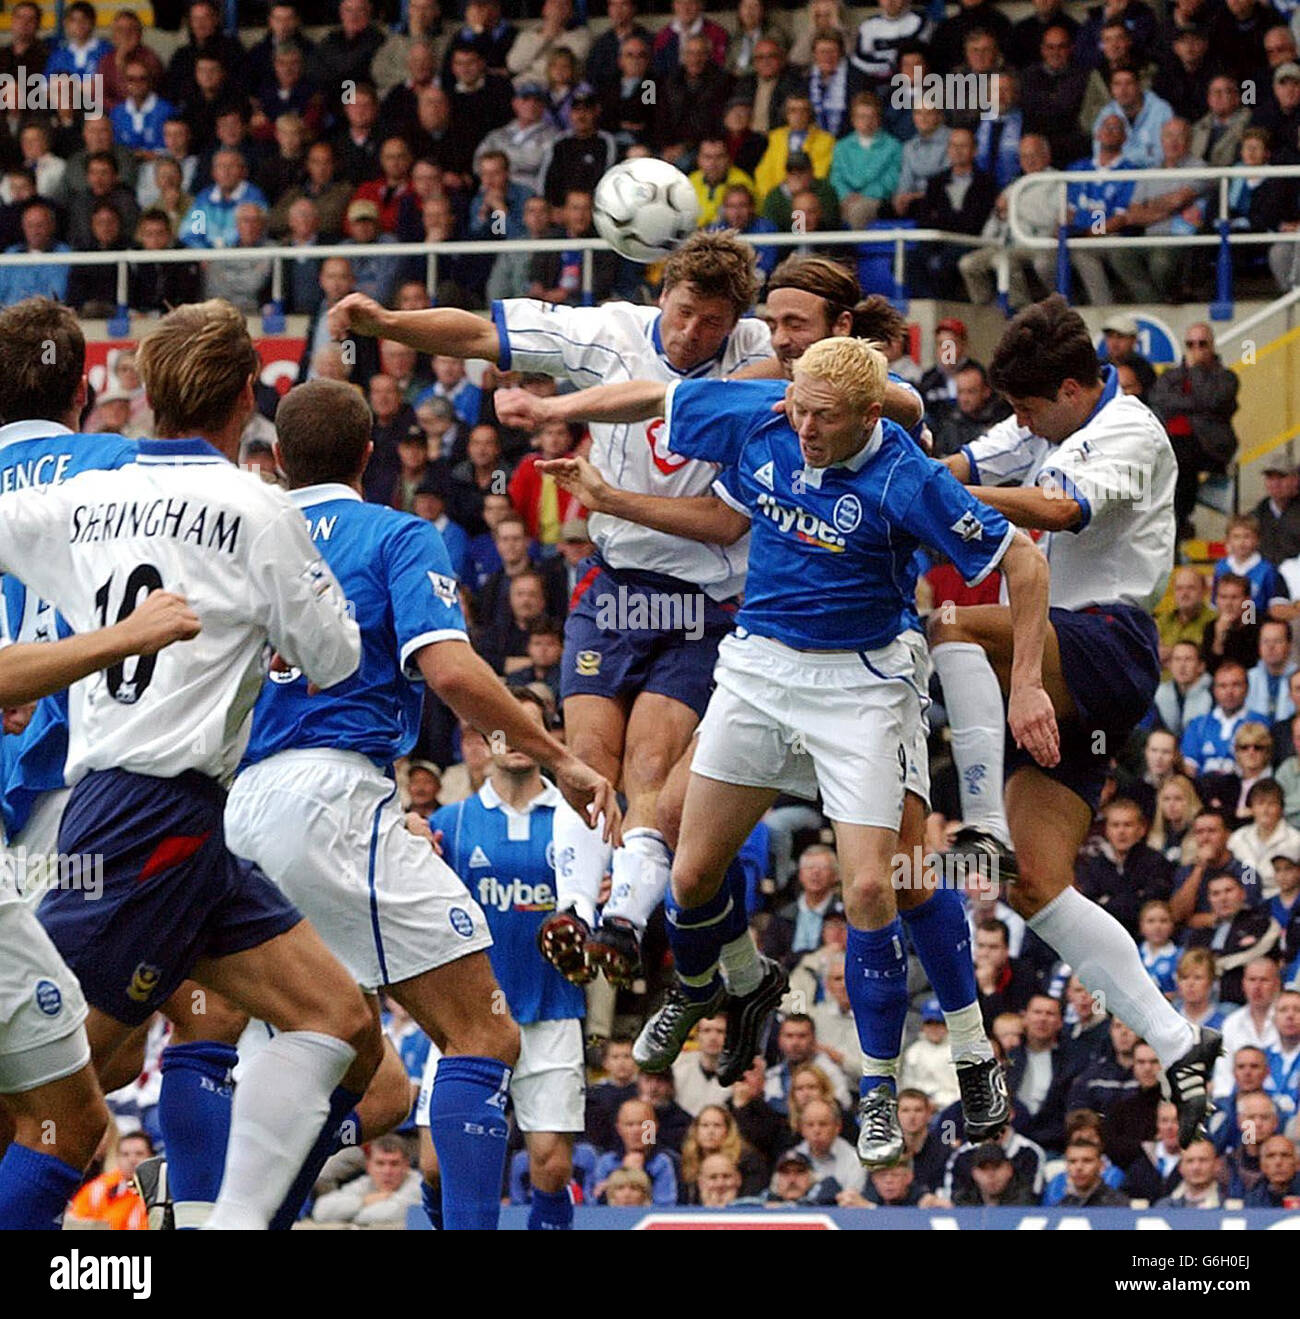 Portsmouth's Arjan De Zeeuw climbs highest to win a header from Birmingham City strikers Mikael Forssell (blonde) and Christophe Dugarry (behind Forssell) during their FA Barclaycard Premiership match at St Andrews, Birmingham. Stock Photo